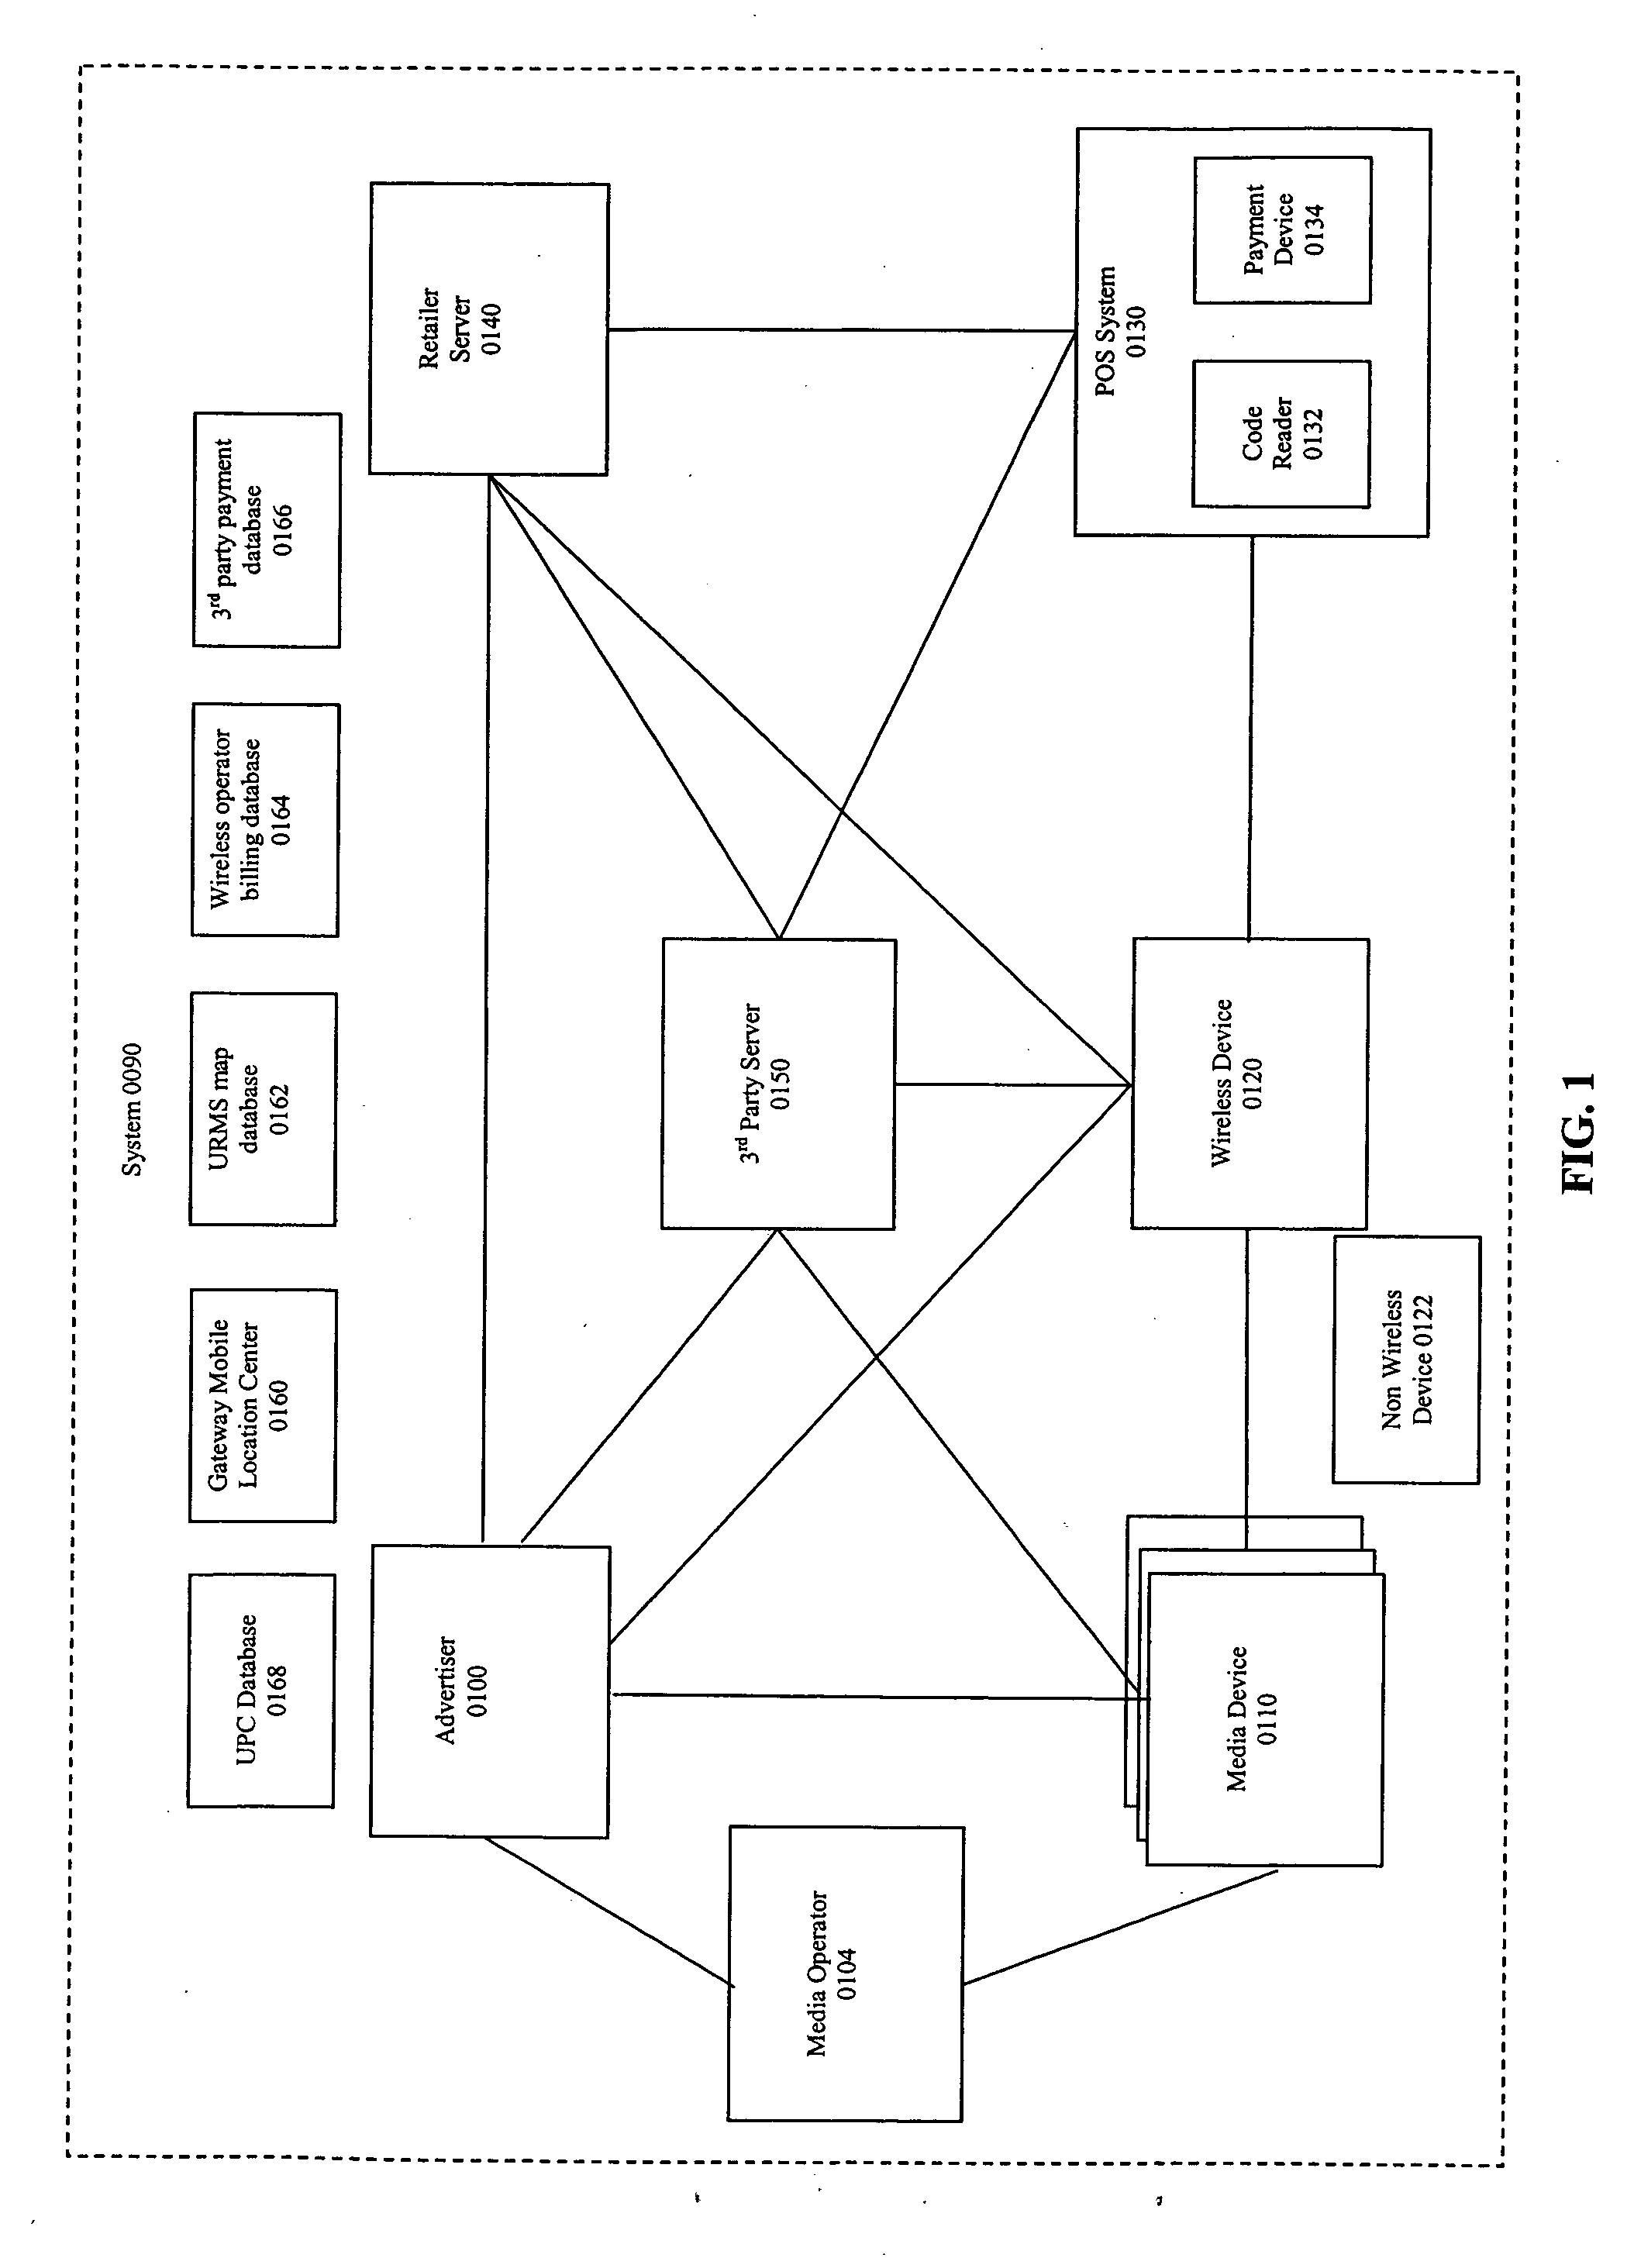 Systems, methods, and computer program products for enabling an advertiser to measure user viewing of and response to advertisements